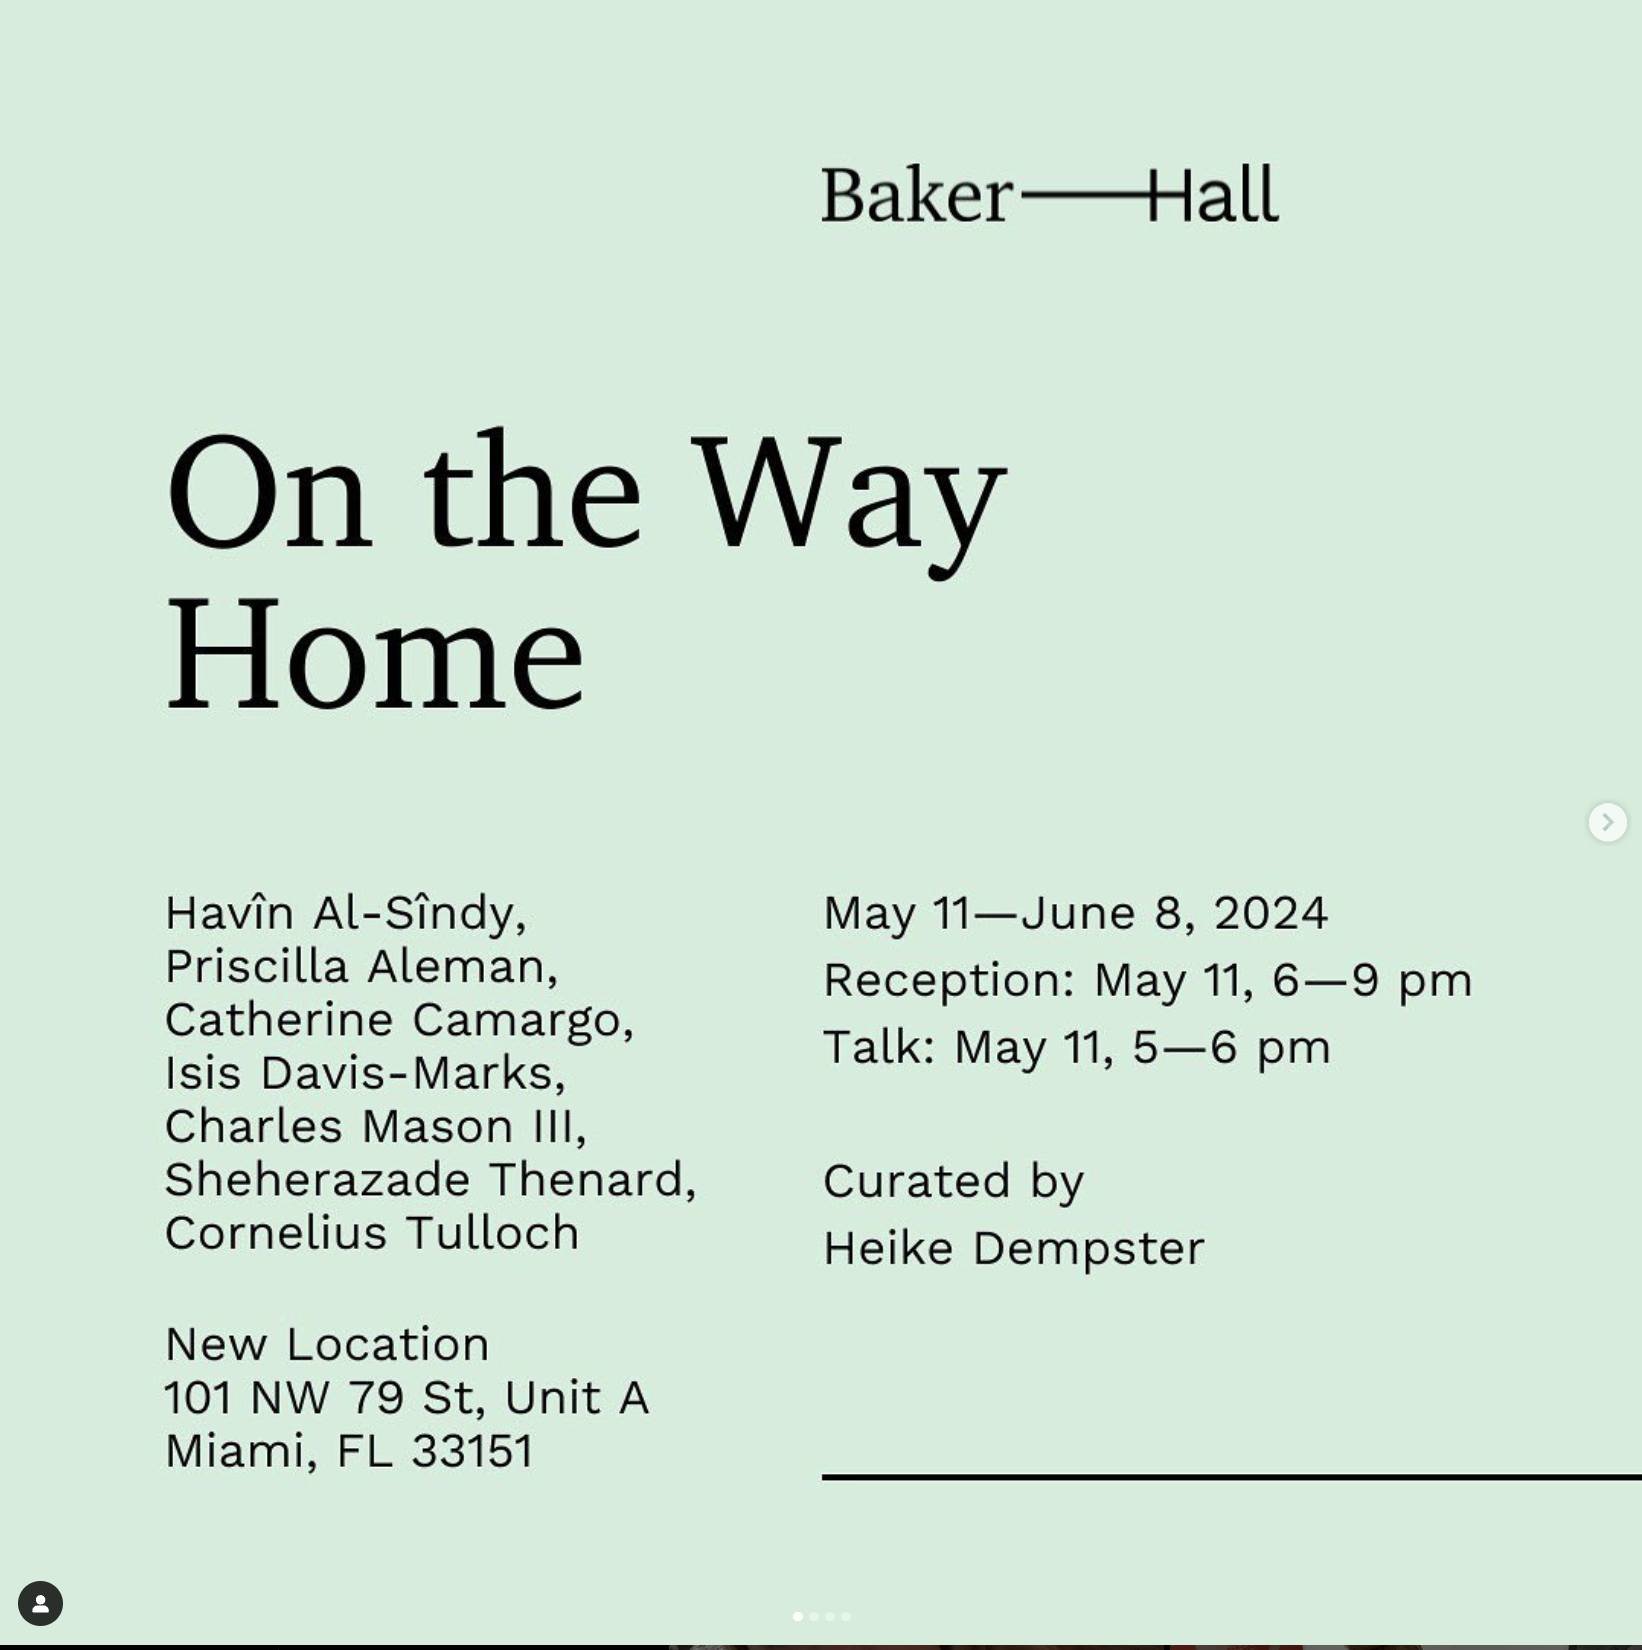 🗓️ Add this to your cultural calendar for Saturday! @sheherazade.thenard  is part of a group show at the new @bakerhall.art gallery at @dimensions_variable in North Miami, On the Way Home, curated by heikedempster. Drawing personal points of connect